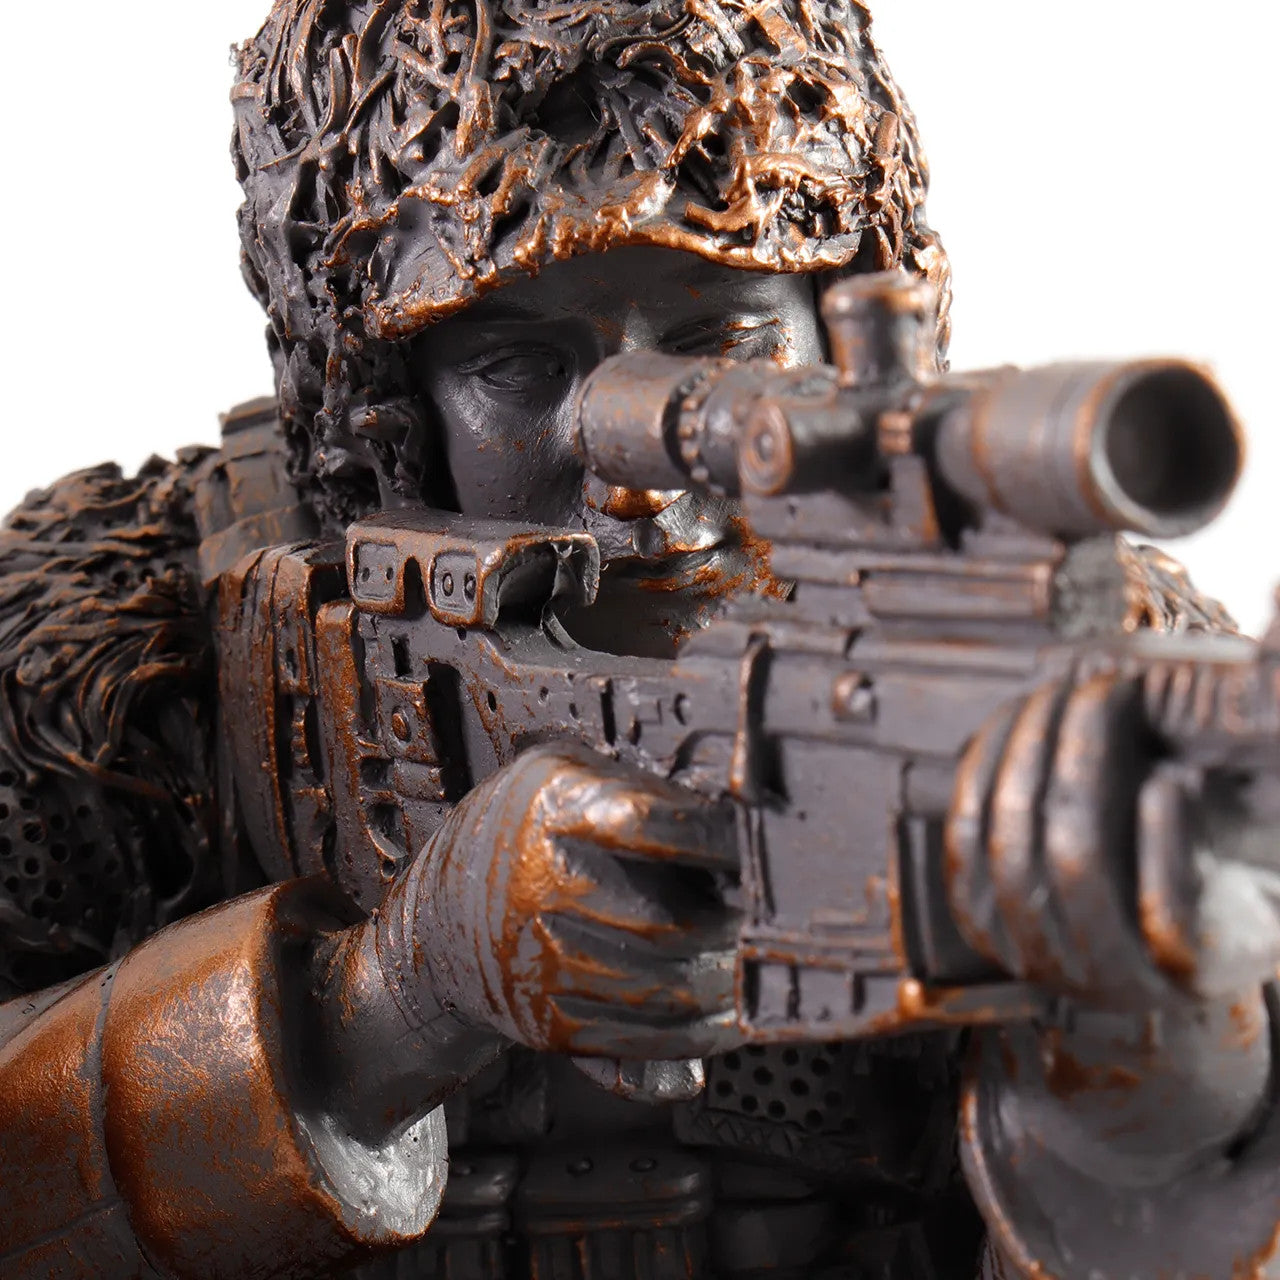 The Limited Edition 'Australian Army Sniper Pair' figurine is a tribute to the skilled marksmen who have played a vital role in Australian military history. www.defenceqstore.com.au